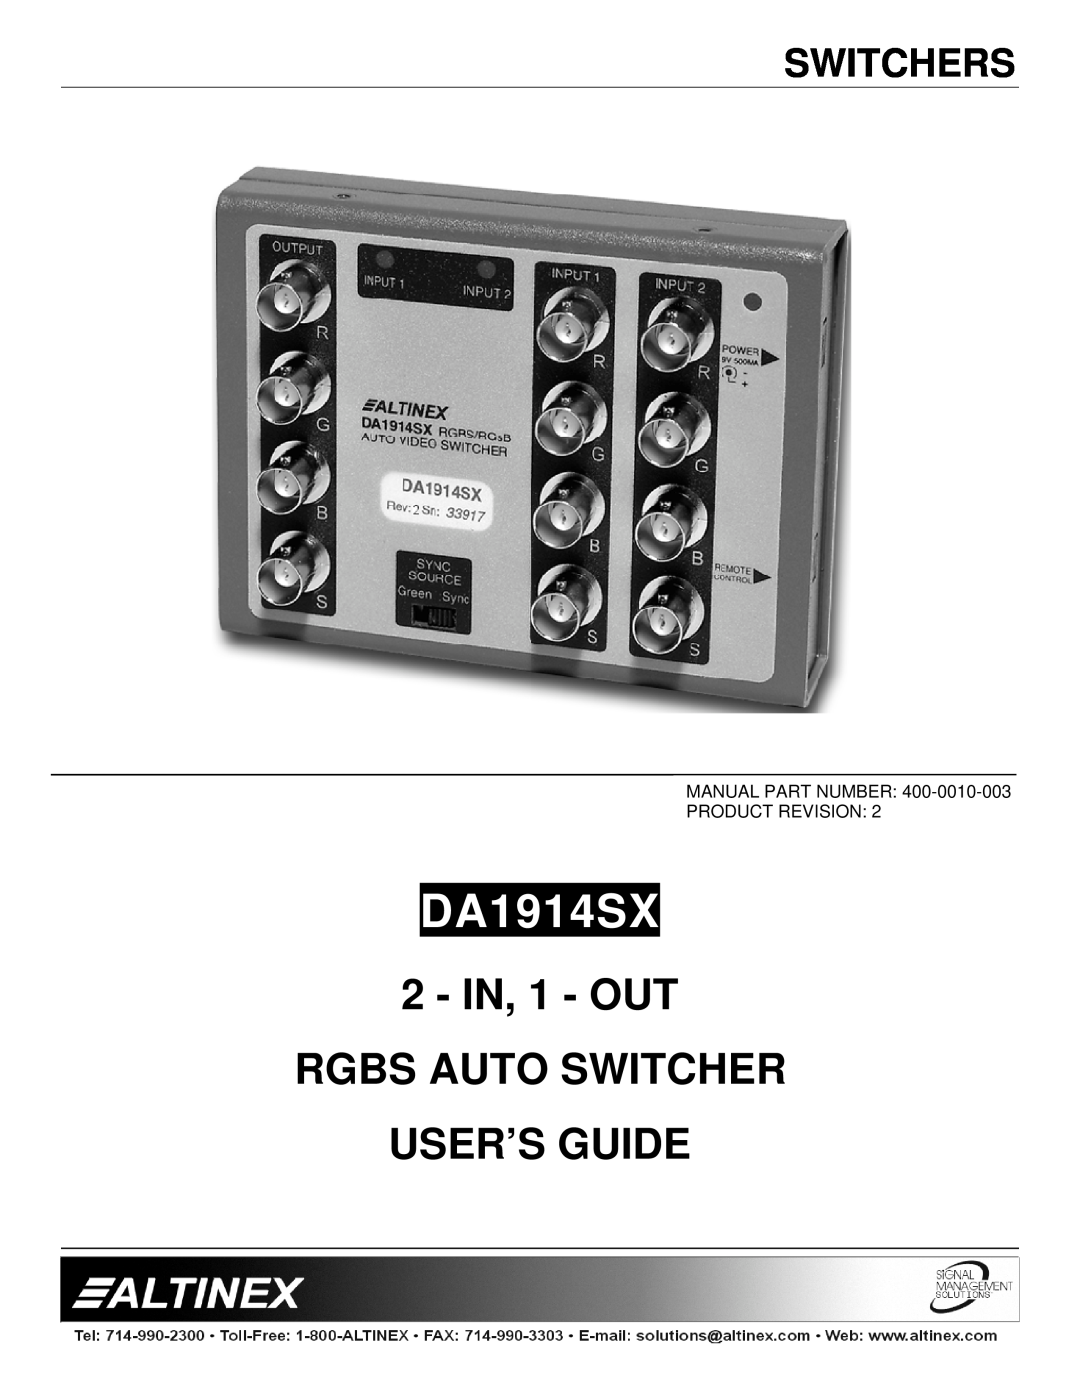 Altinex DA1914SX manual Switchers, IN, 1 - OUT RGBS AUTO SWITCHER USER’S GUIDE 